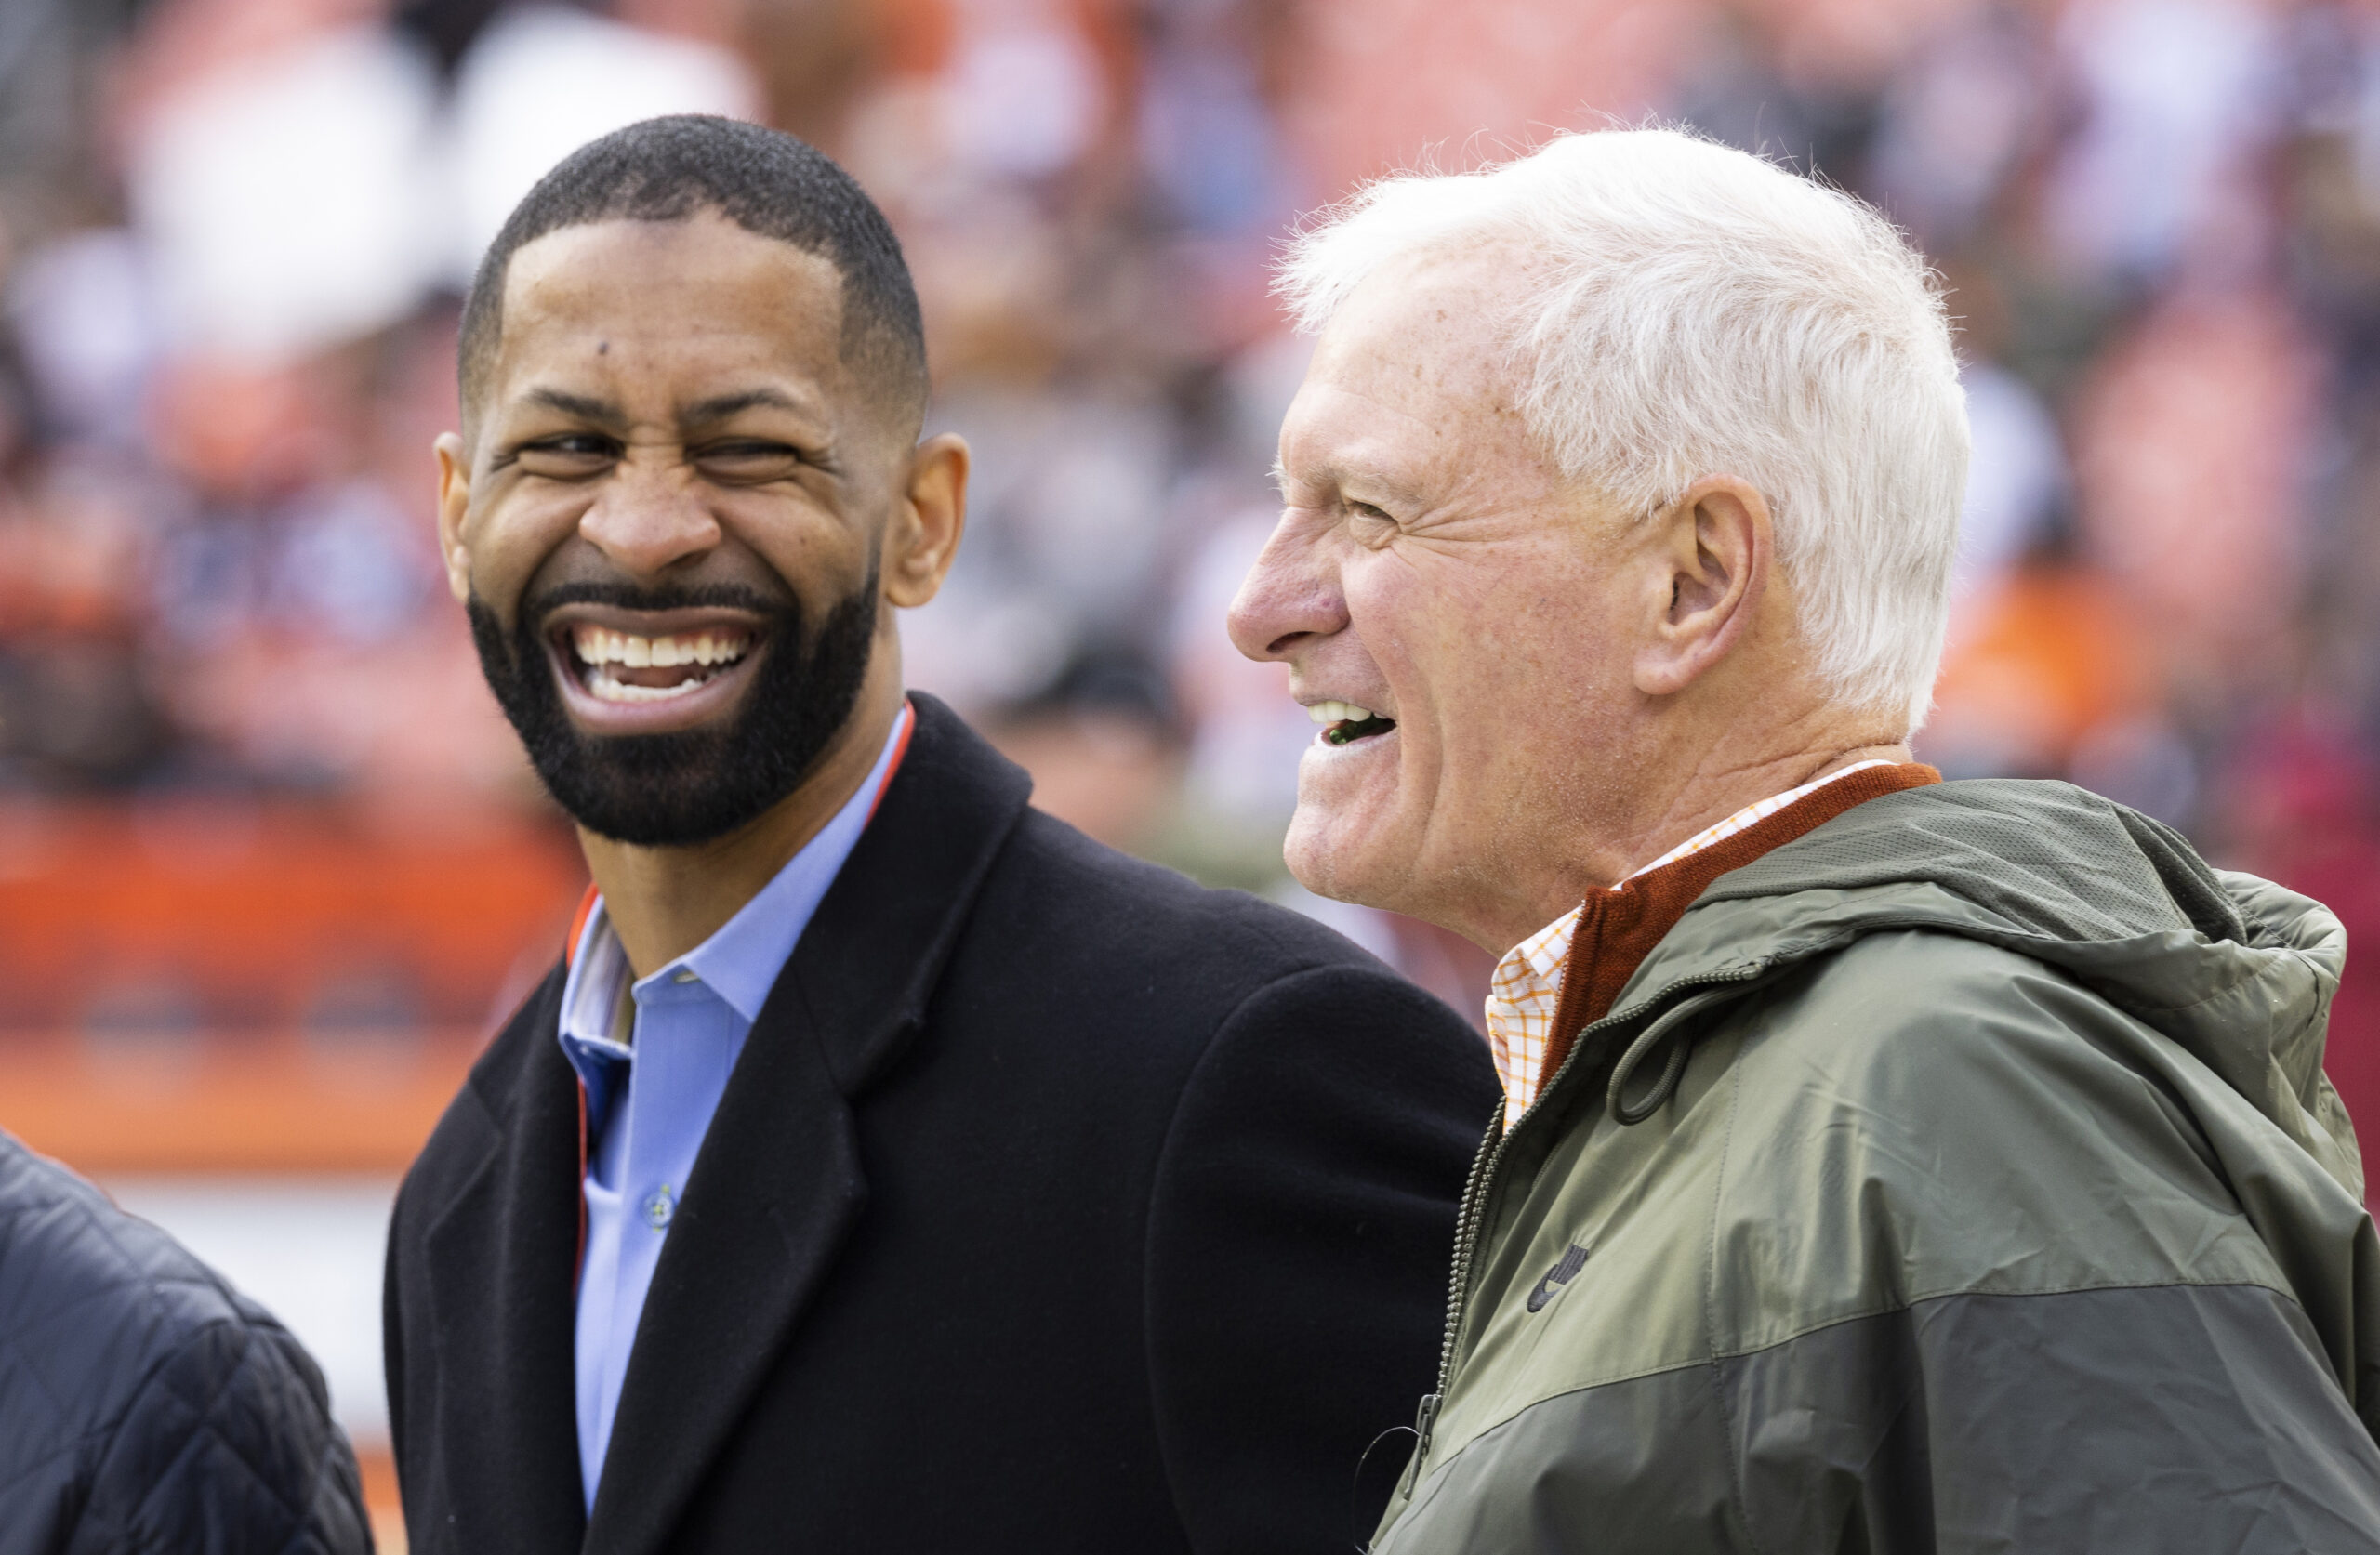 Browns: Jimmy Haslam committed to upgrading First Energy Stadium